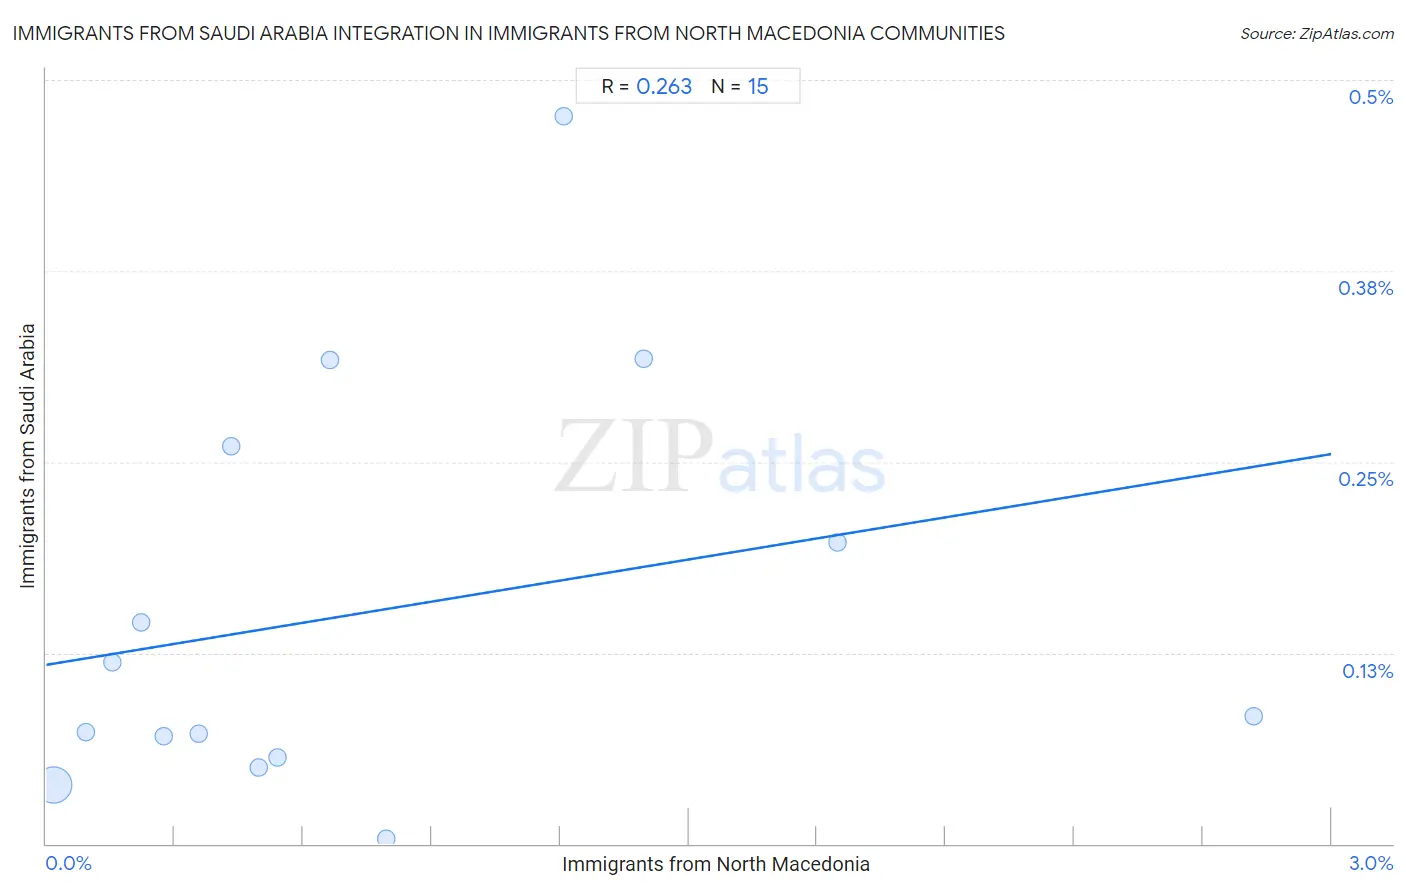 Immigrants from North Macedonia Integration in Immigrants from Saudi Arabia Communities